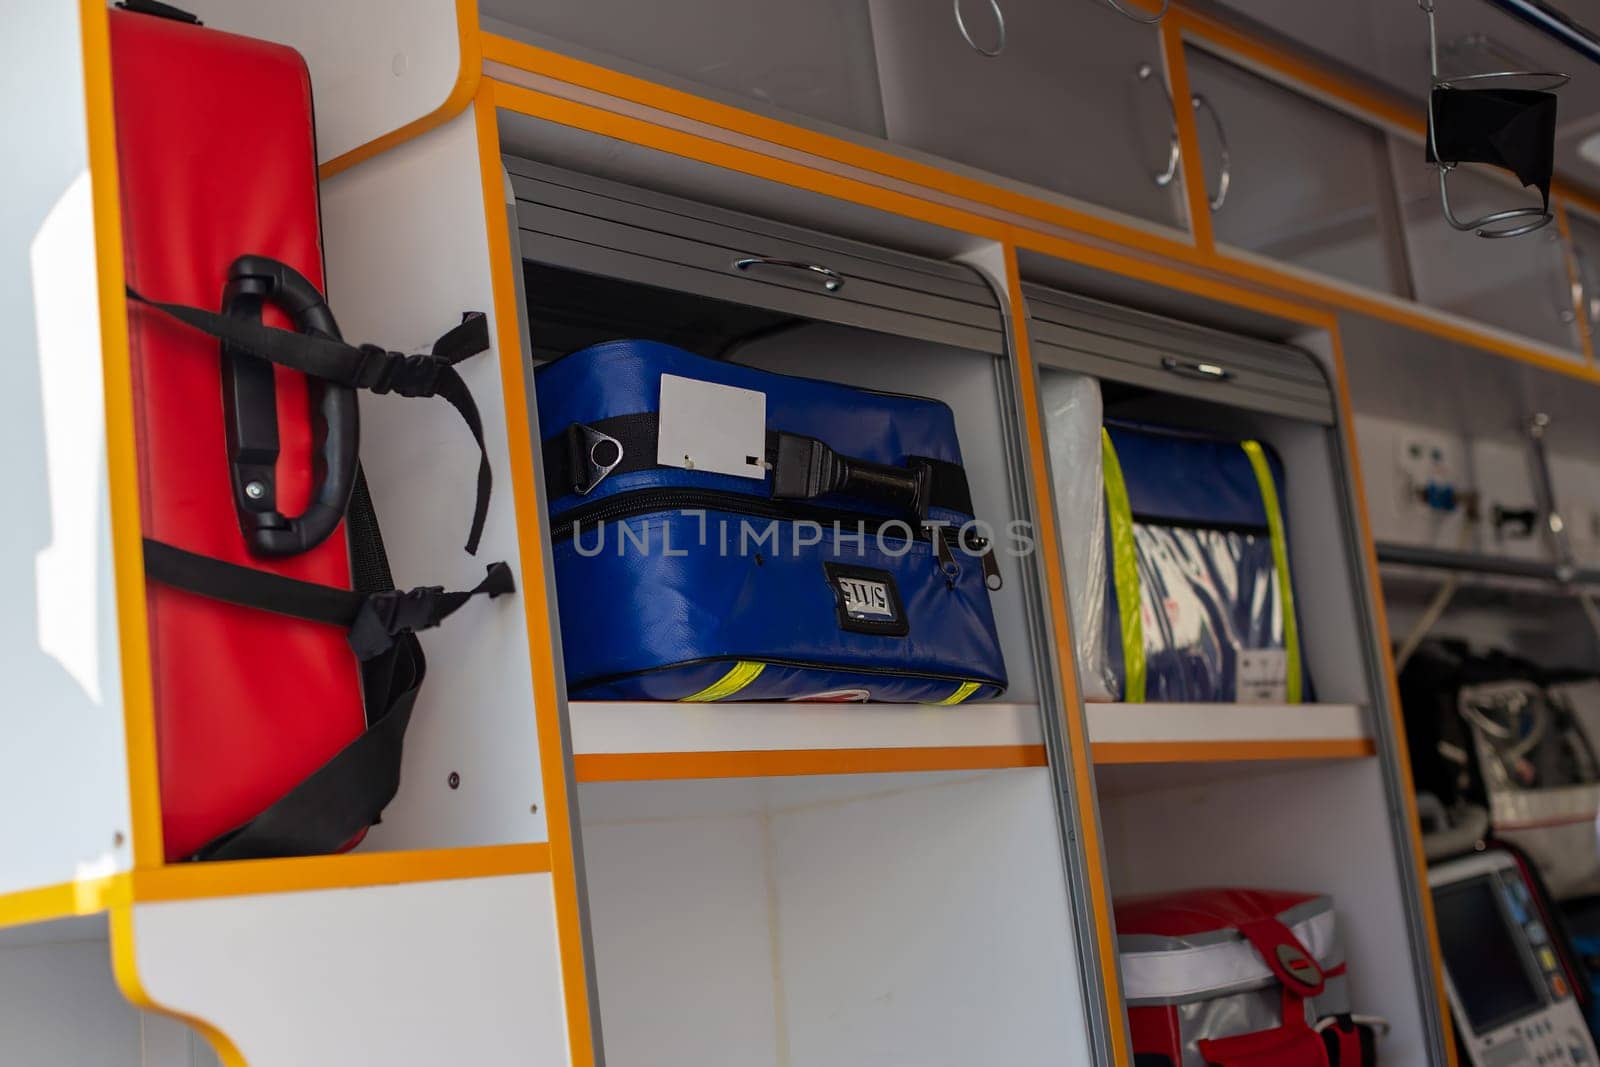 Inside the ambulance, medical supplies and storage compartments are visible, with red and blue bags by Zakharova